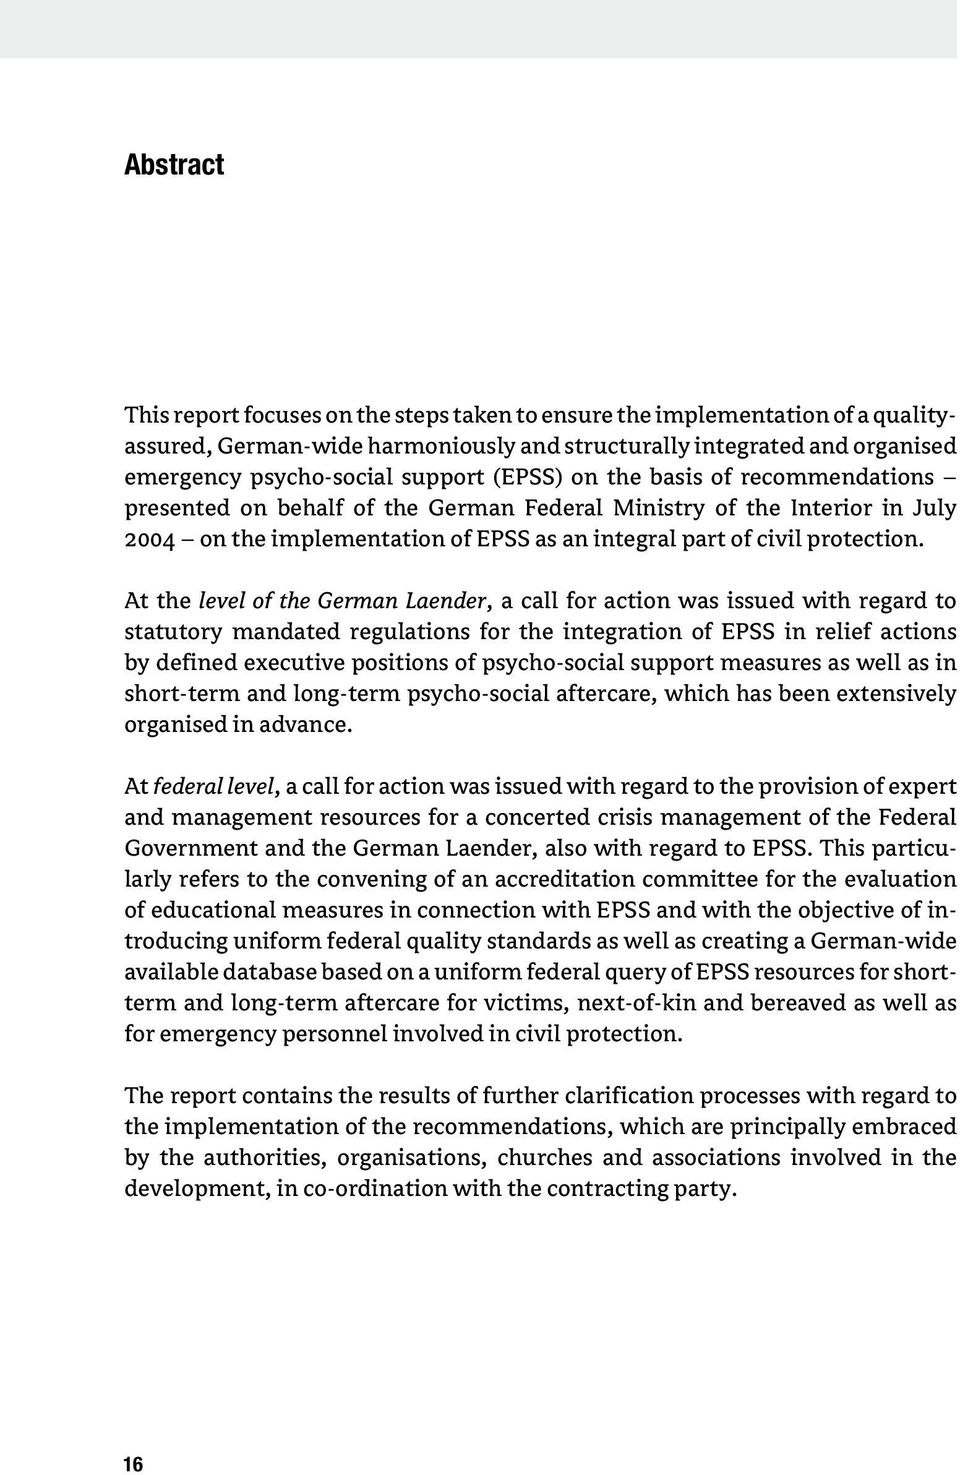 At the level of the German Laender, a call for action was issued with regard to statutory mandated regulations for the integration of EPSS in relief actions by defined executive positions of